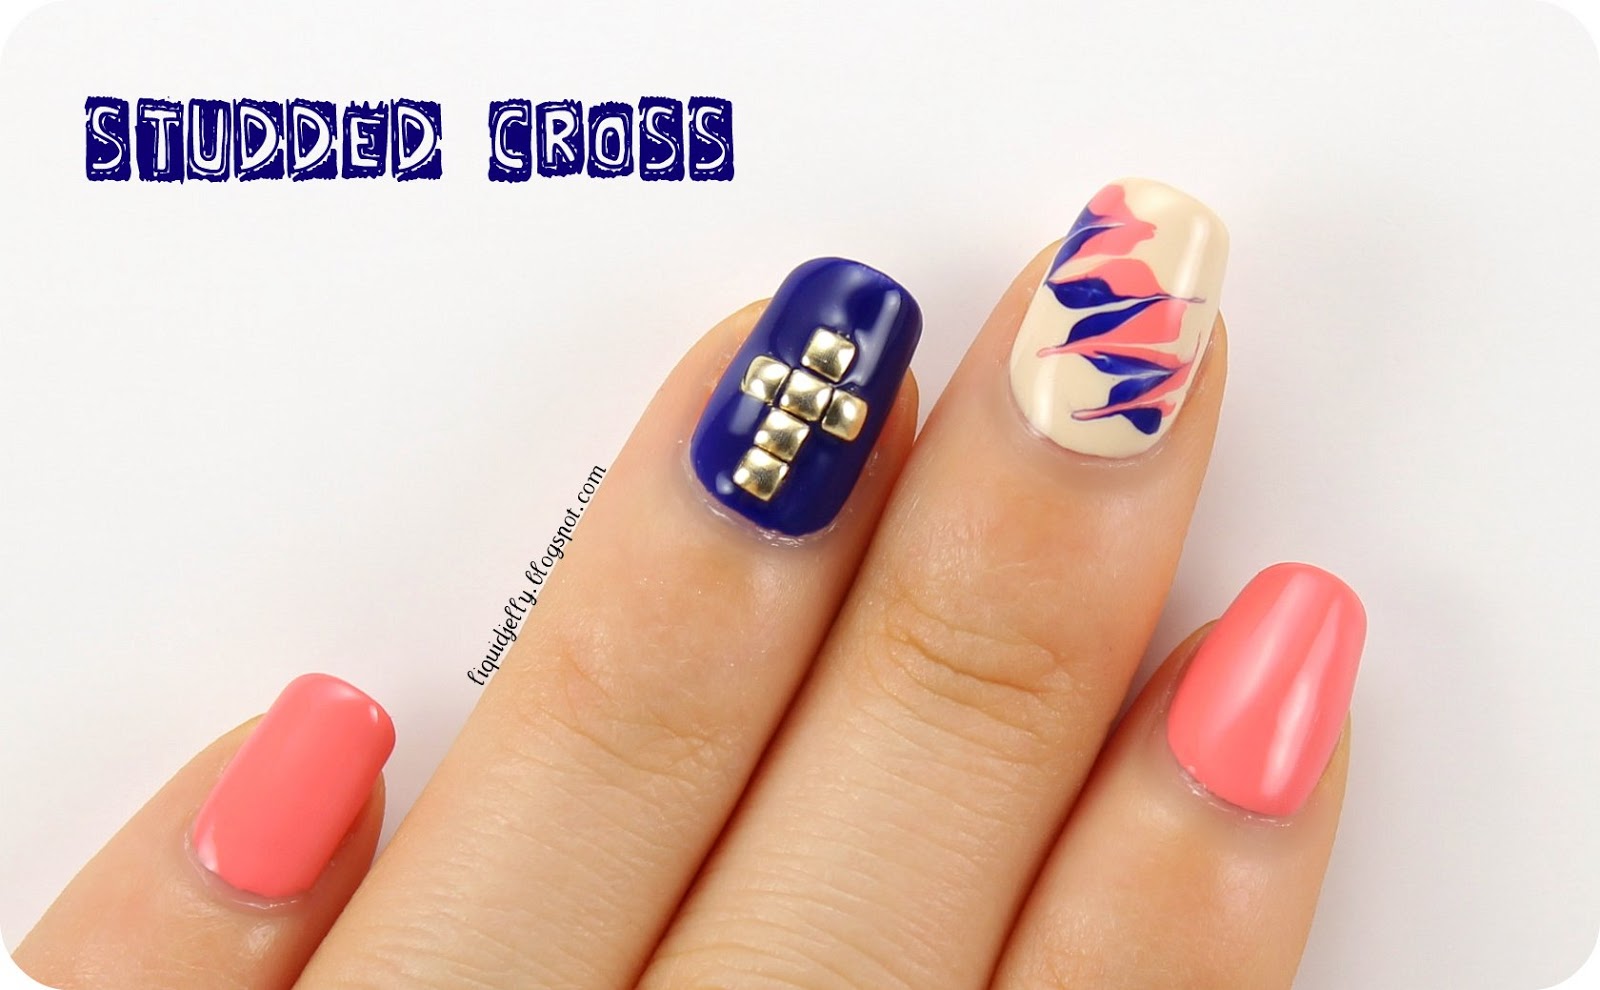 1. Cross Nail Art Designs for a Bold and Beautiful Look - wide 3